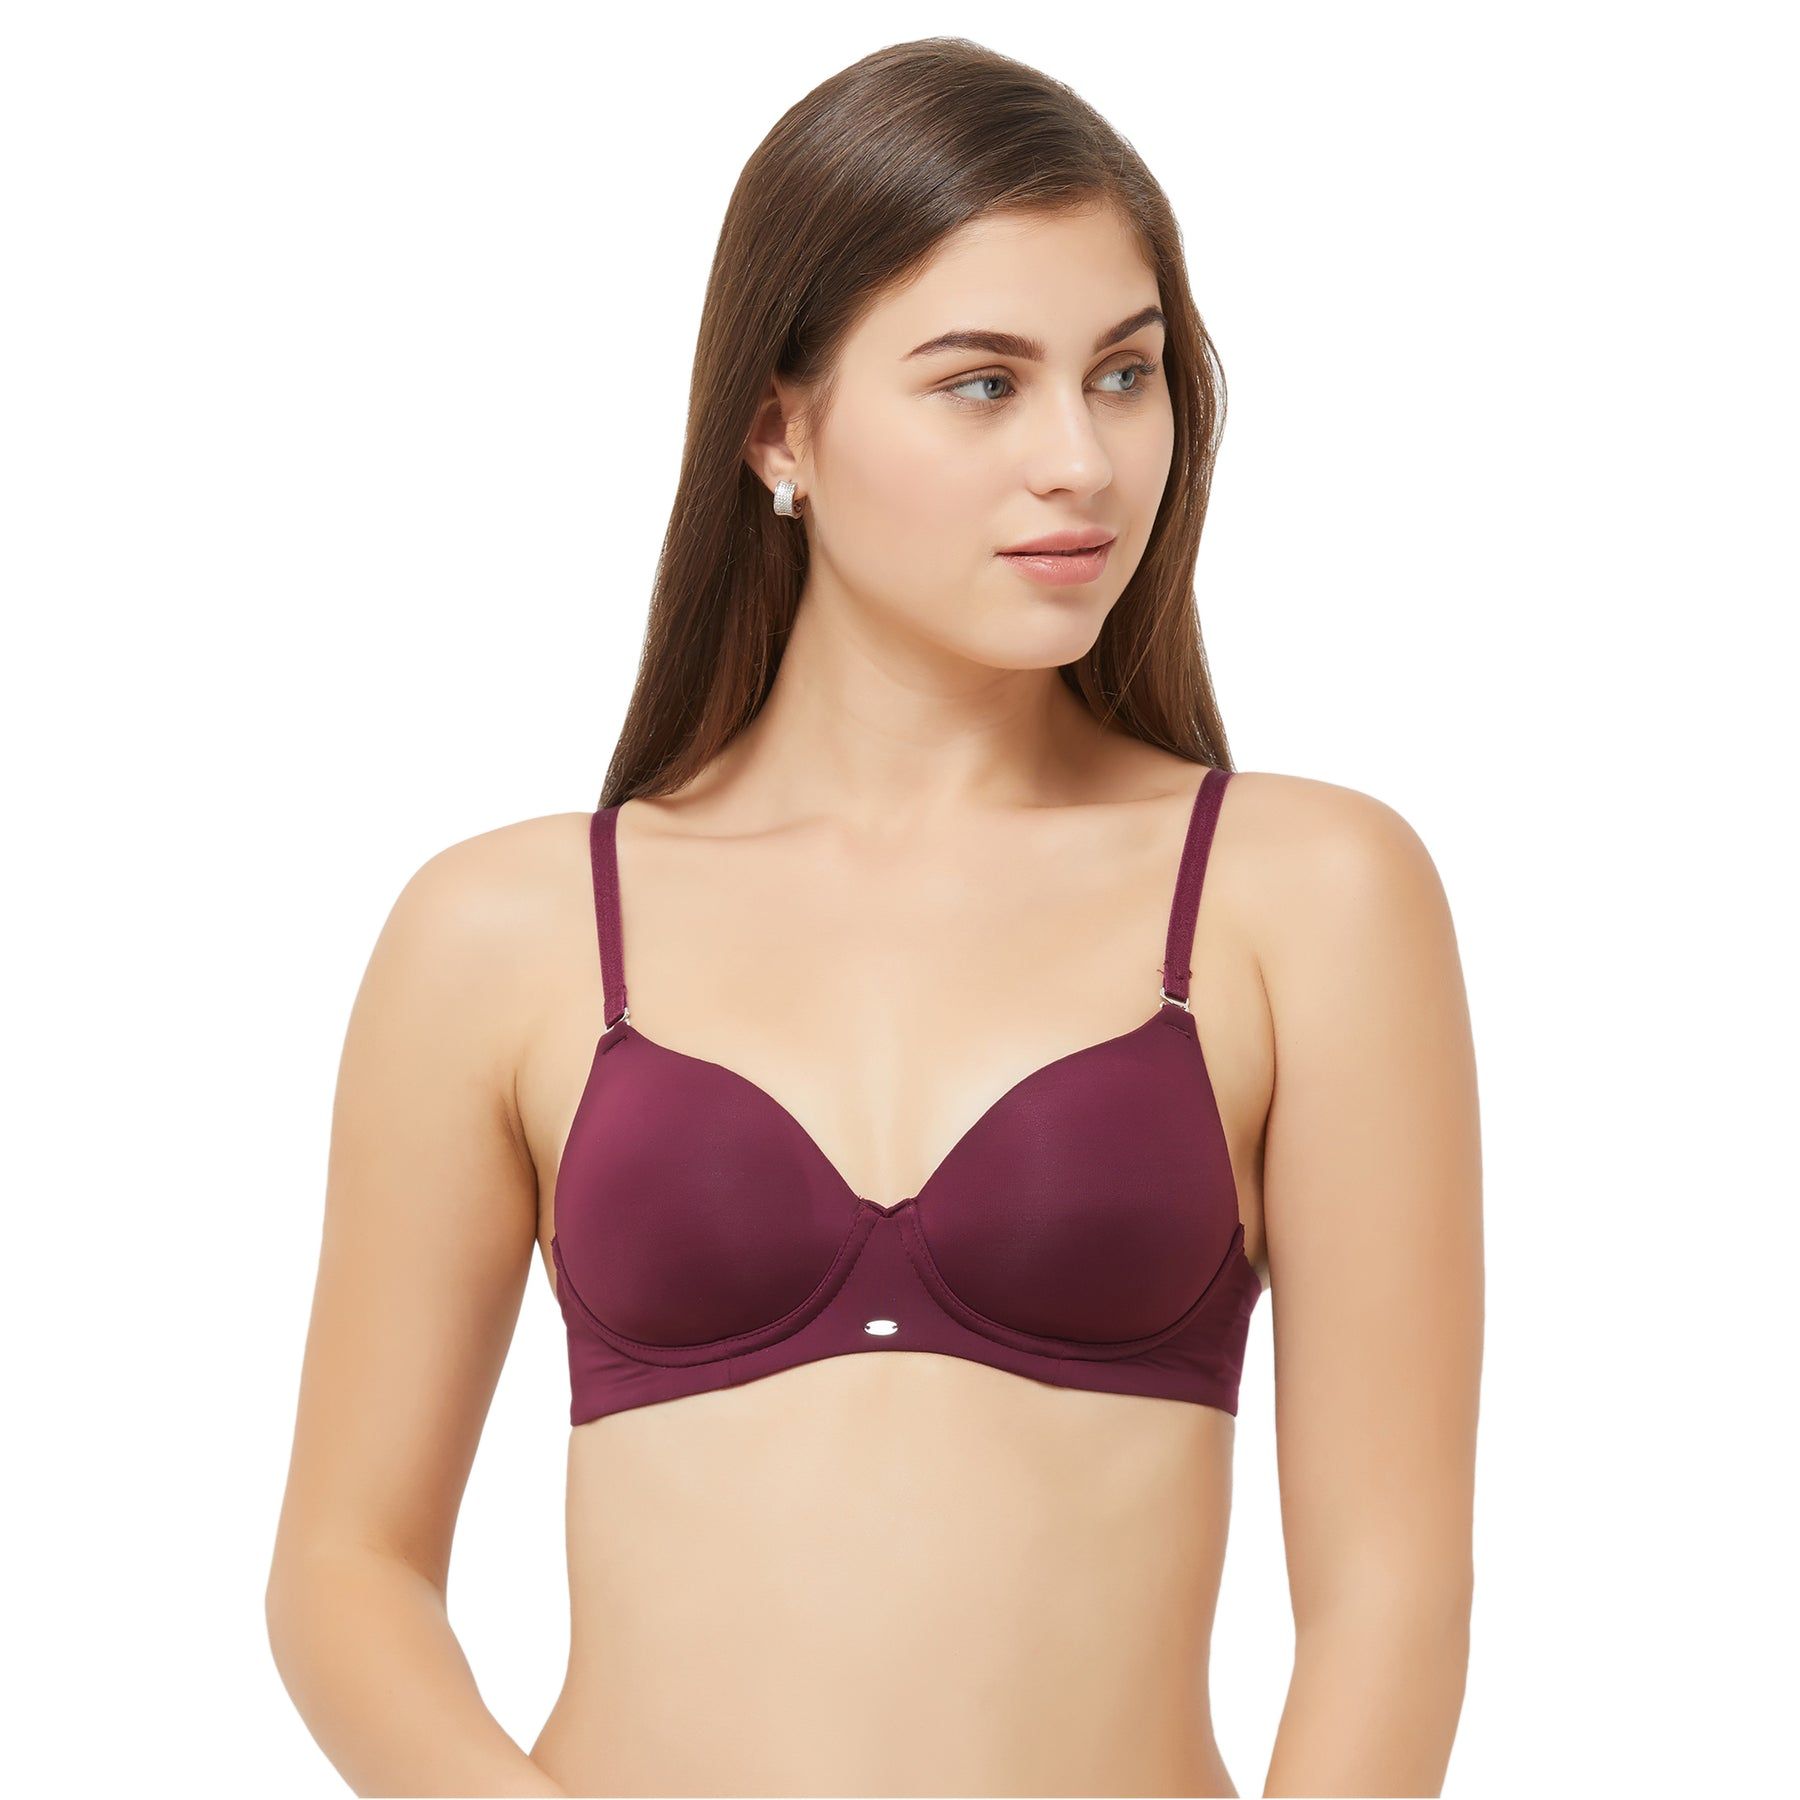 Buy Cotton Non-Padded Non-Wired Bra with Detachable Straps In